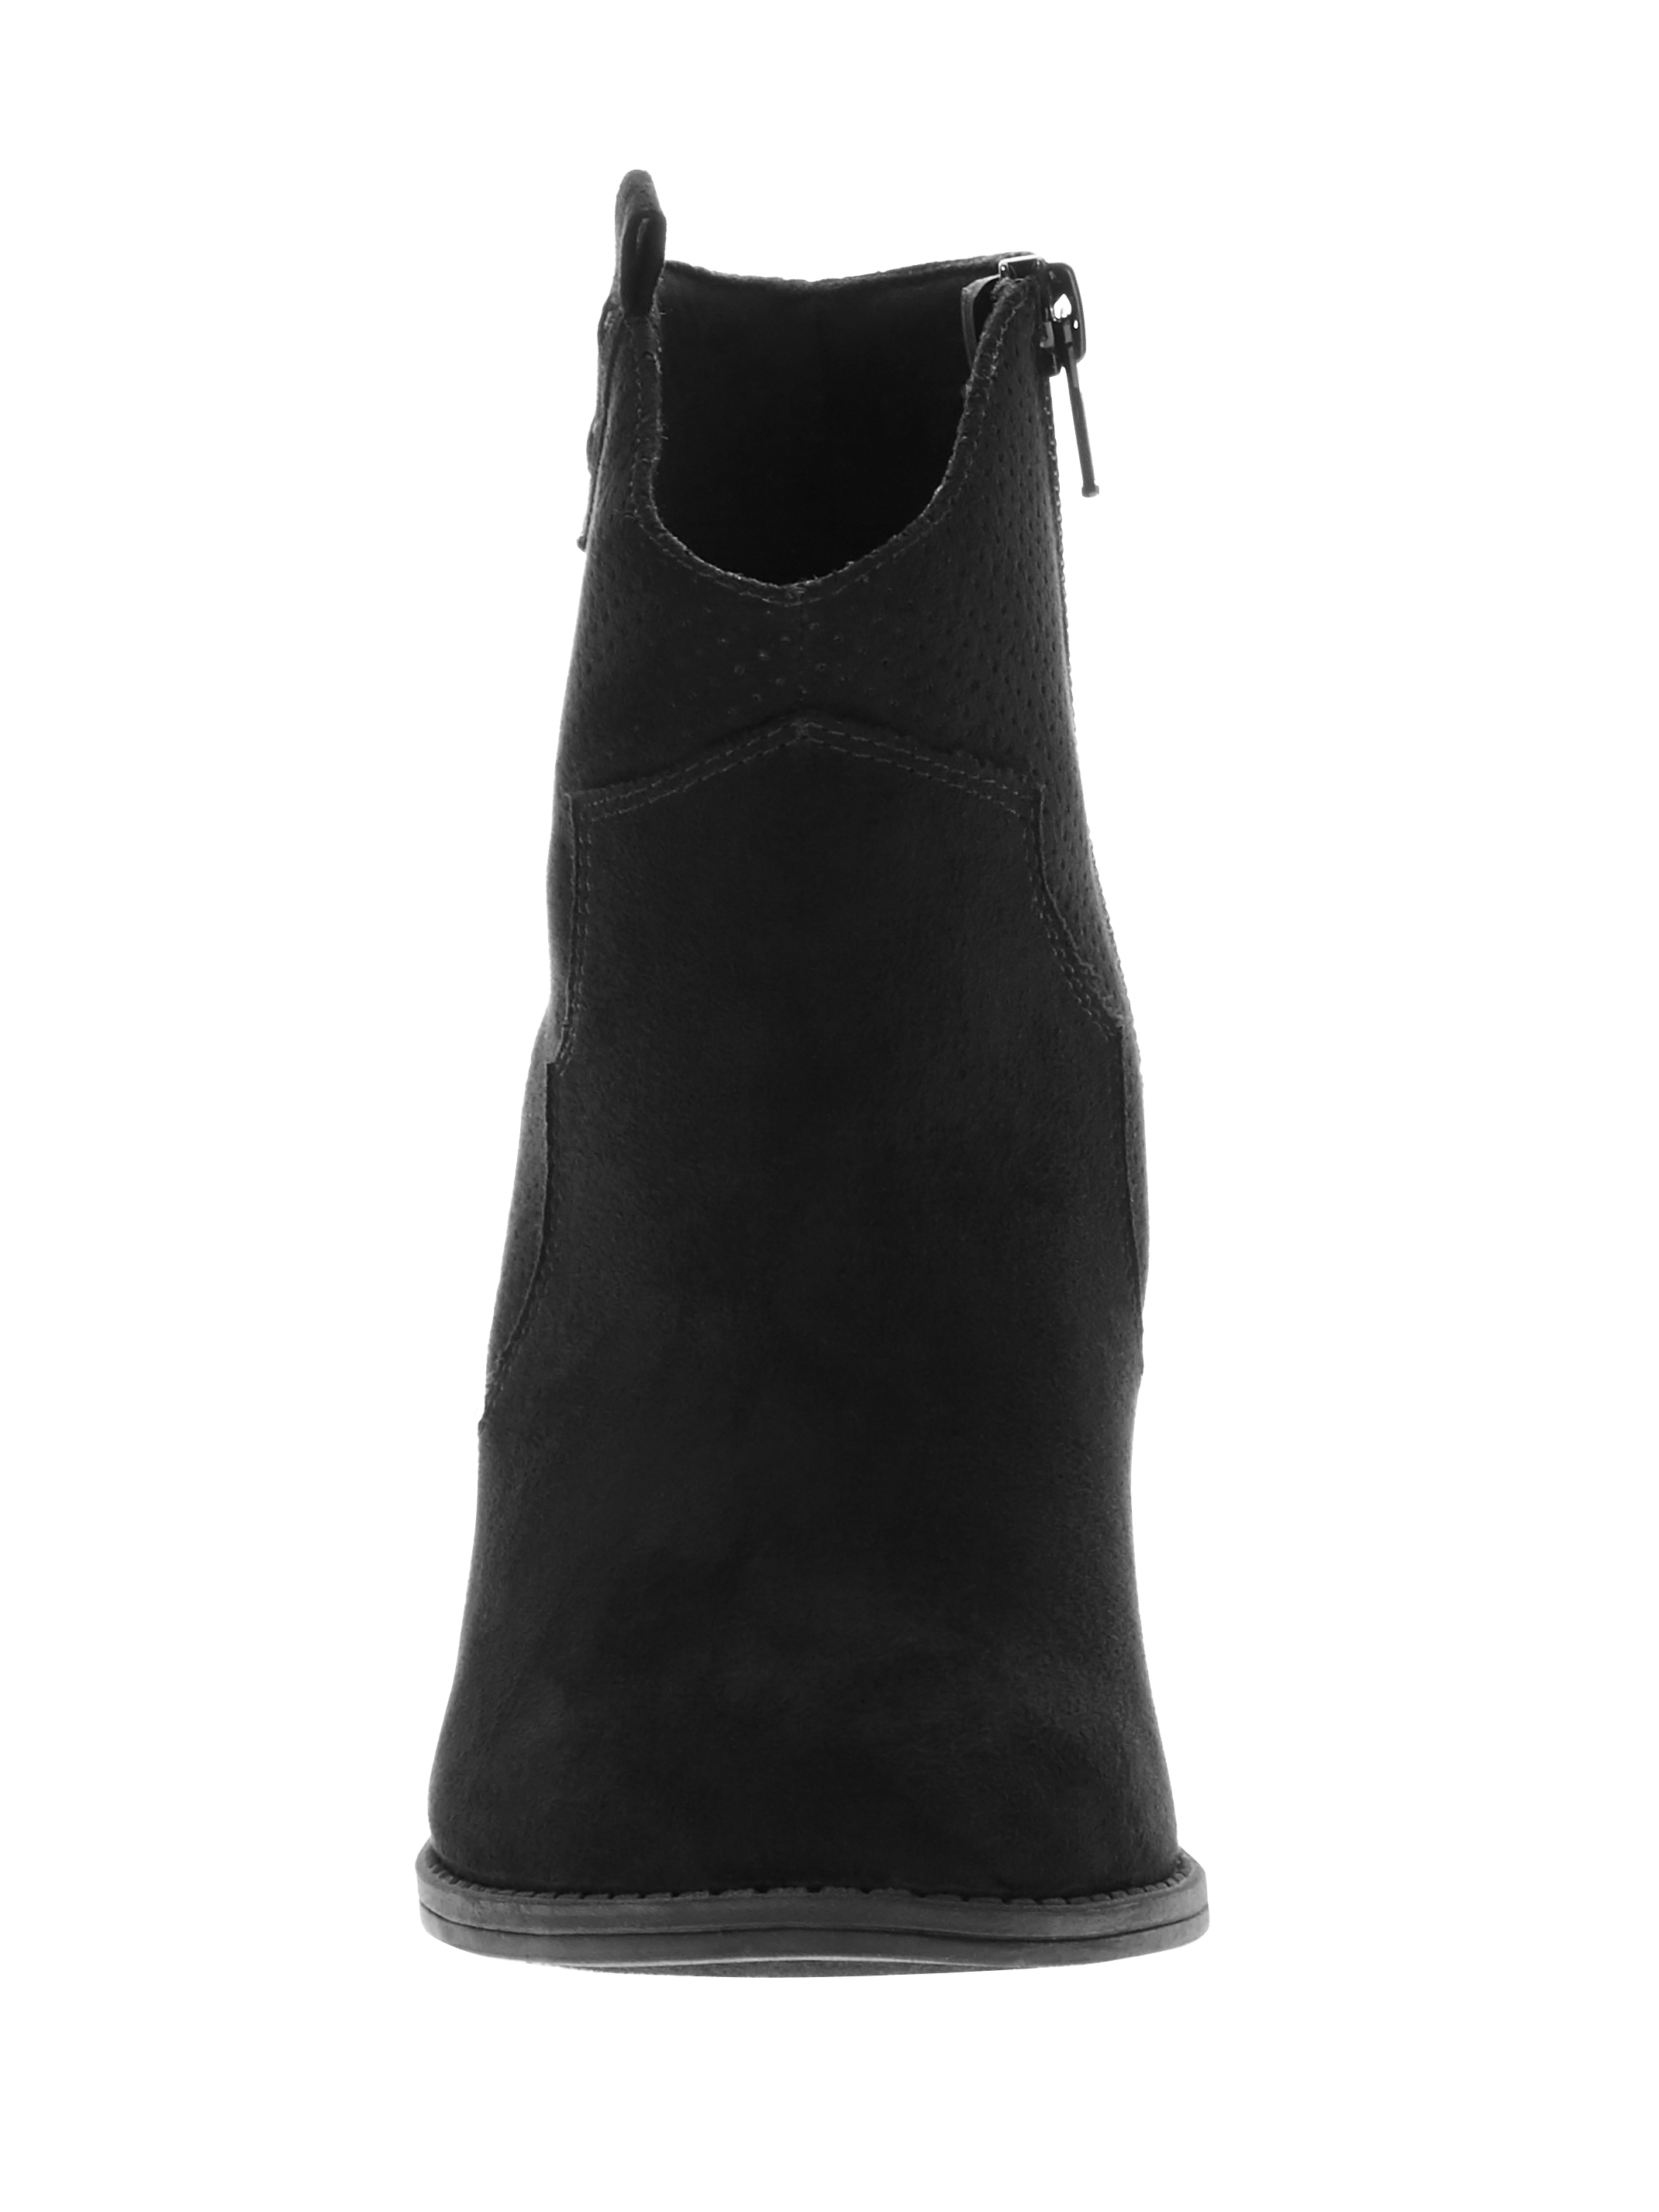 Time and Tru Women's Western Style Boot - image 3 of 6